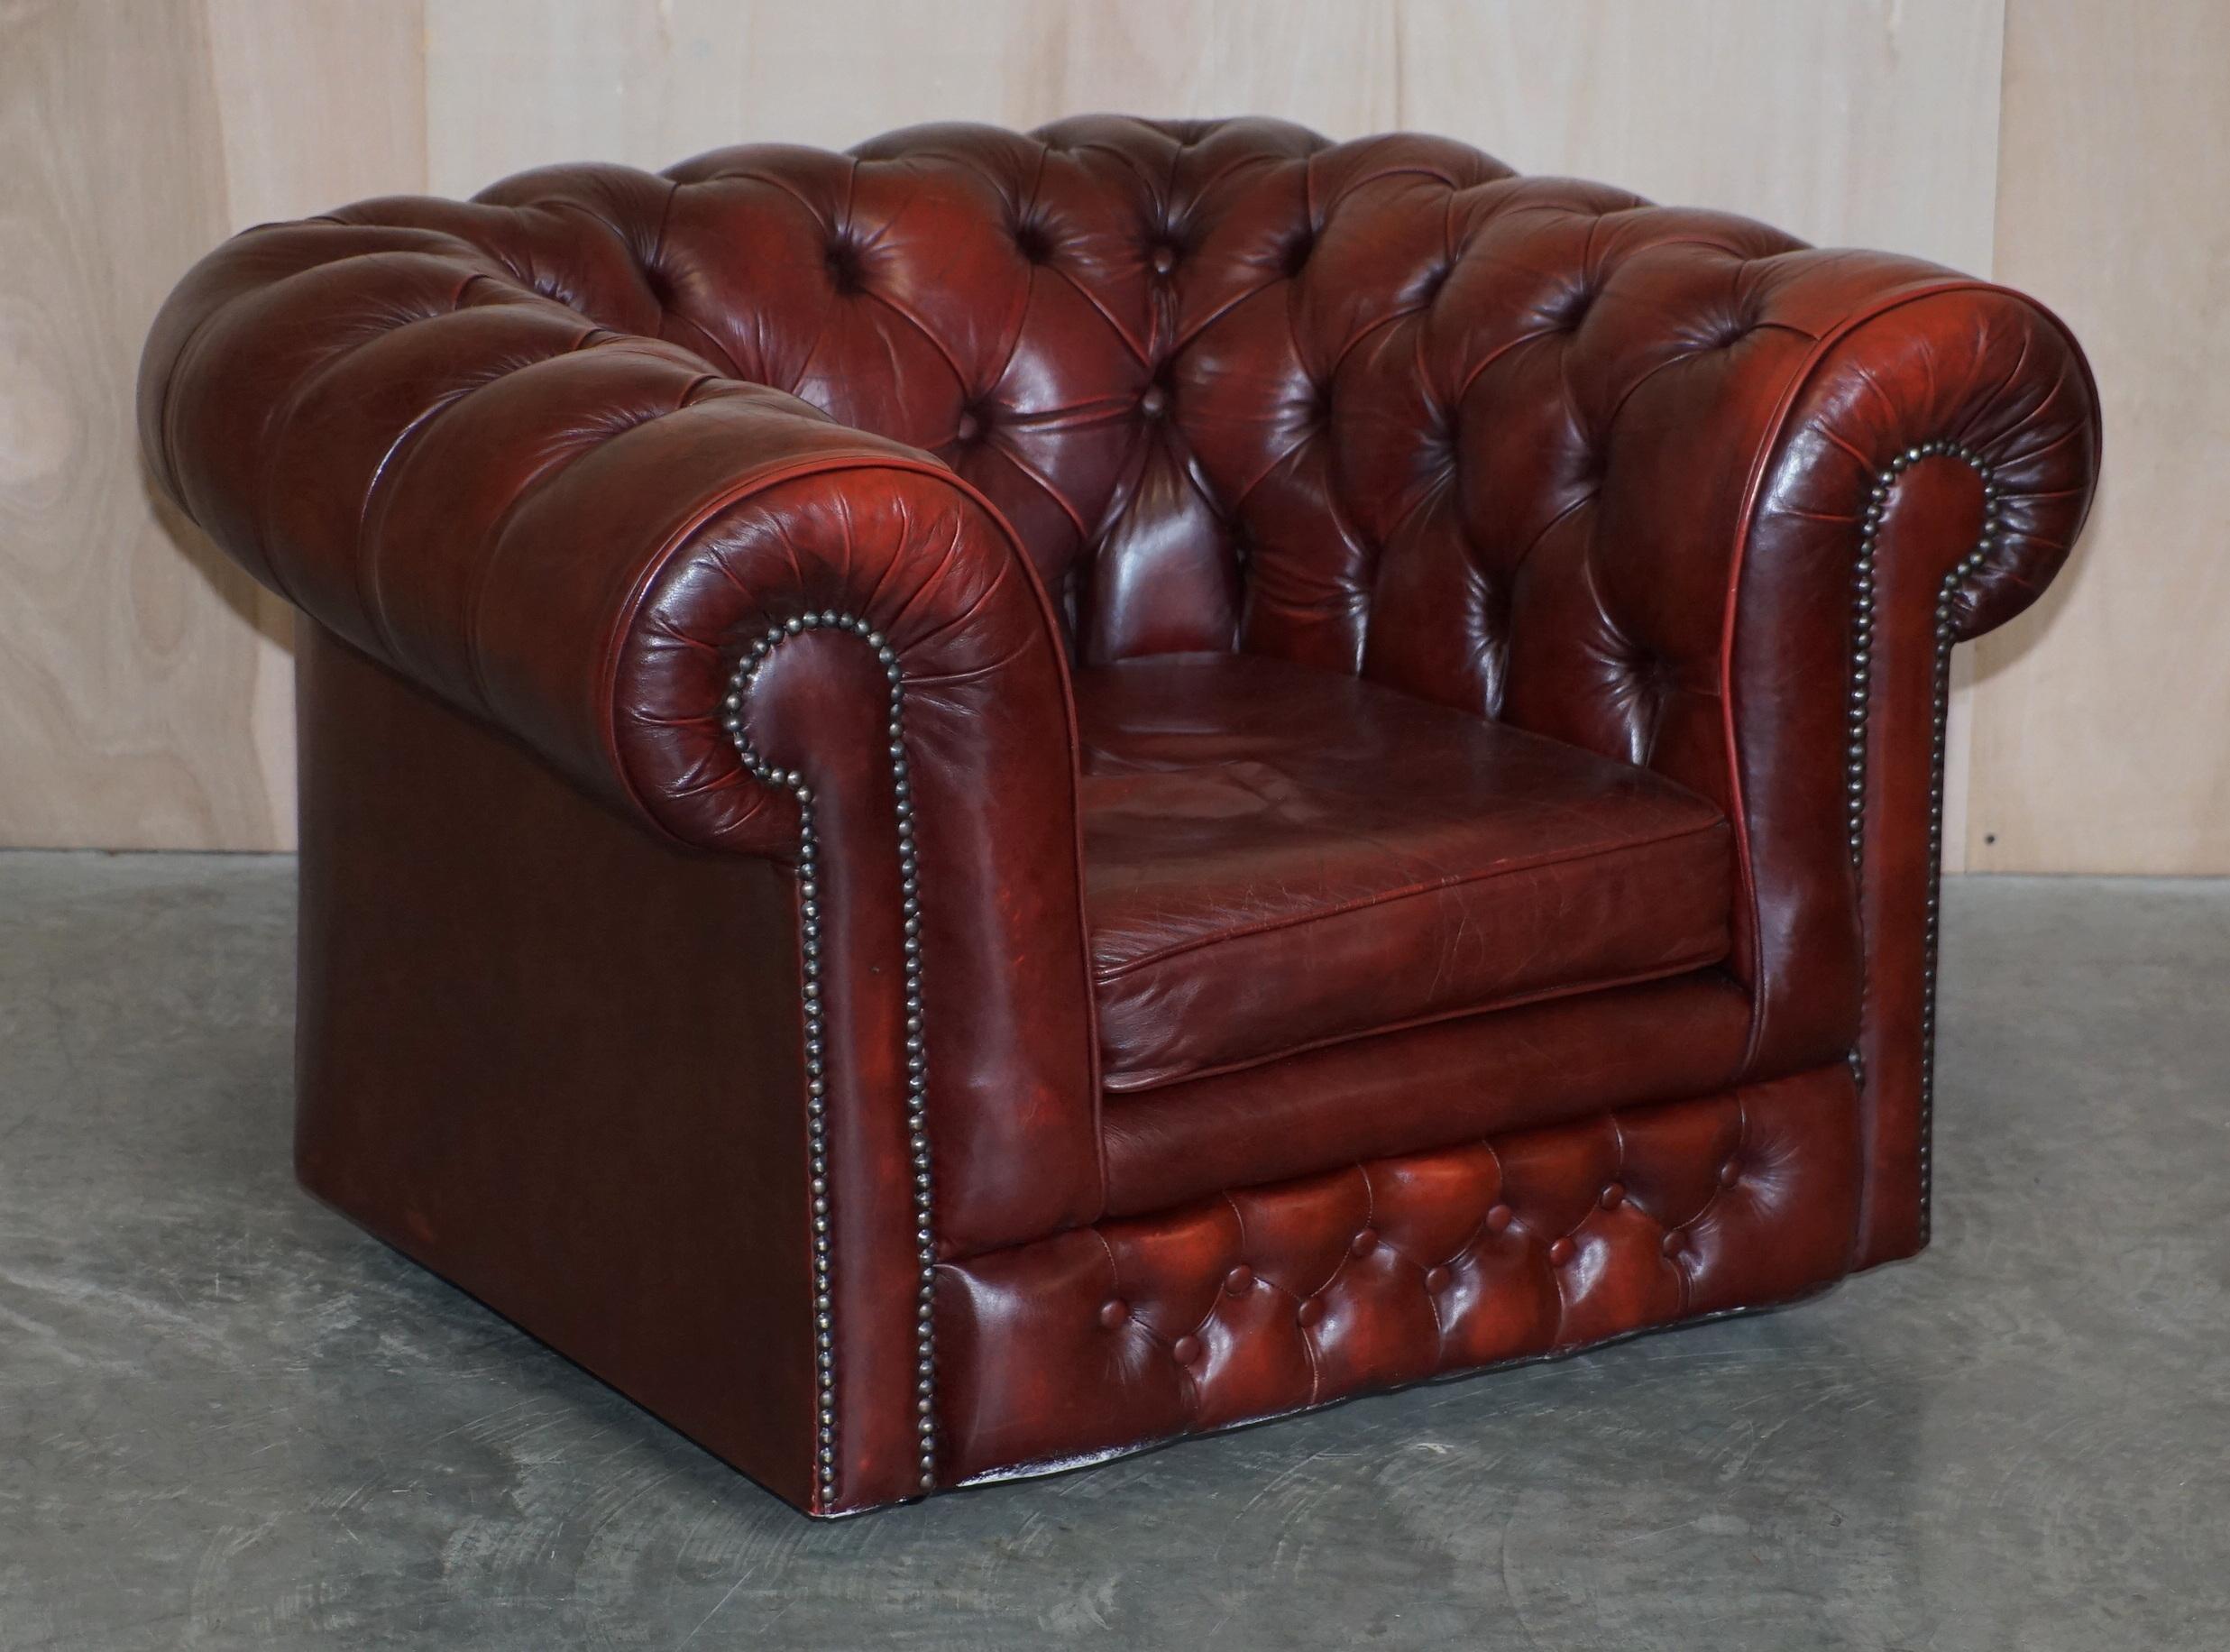 Pair of Lovely Vintage Oxblood Leather Chesterfield Gentleman's Club Armchairs For Sale 5